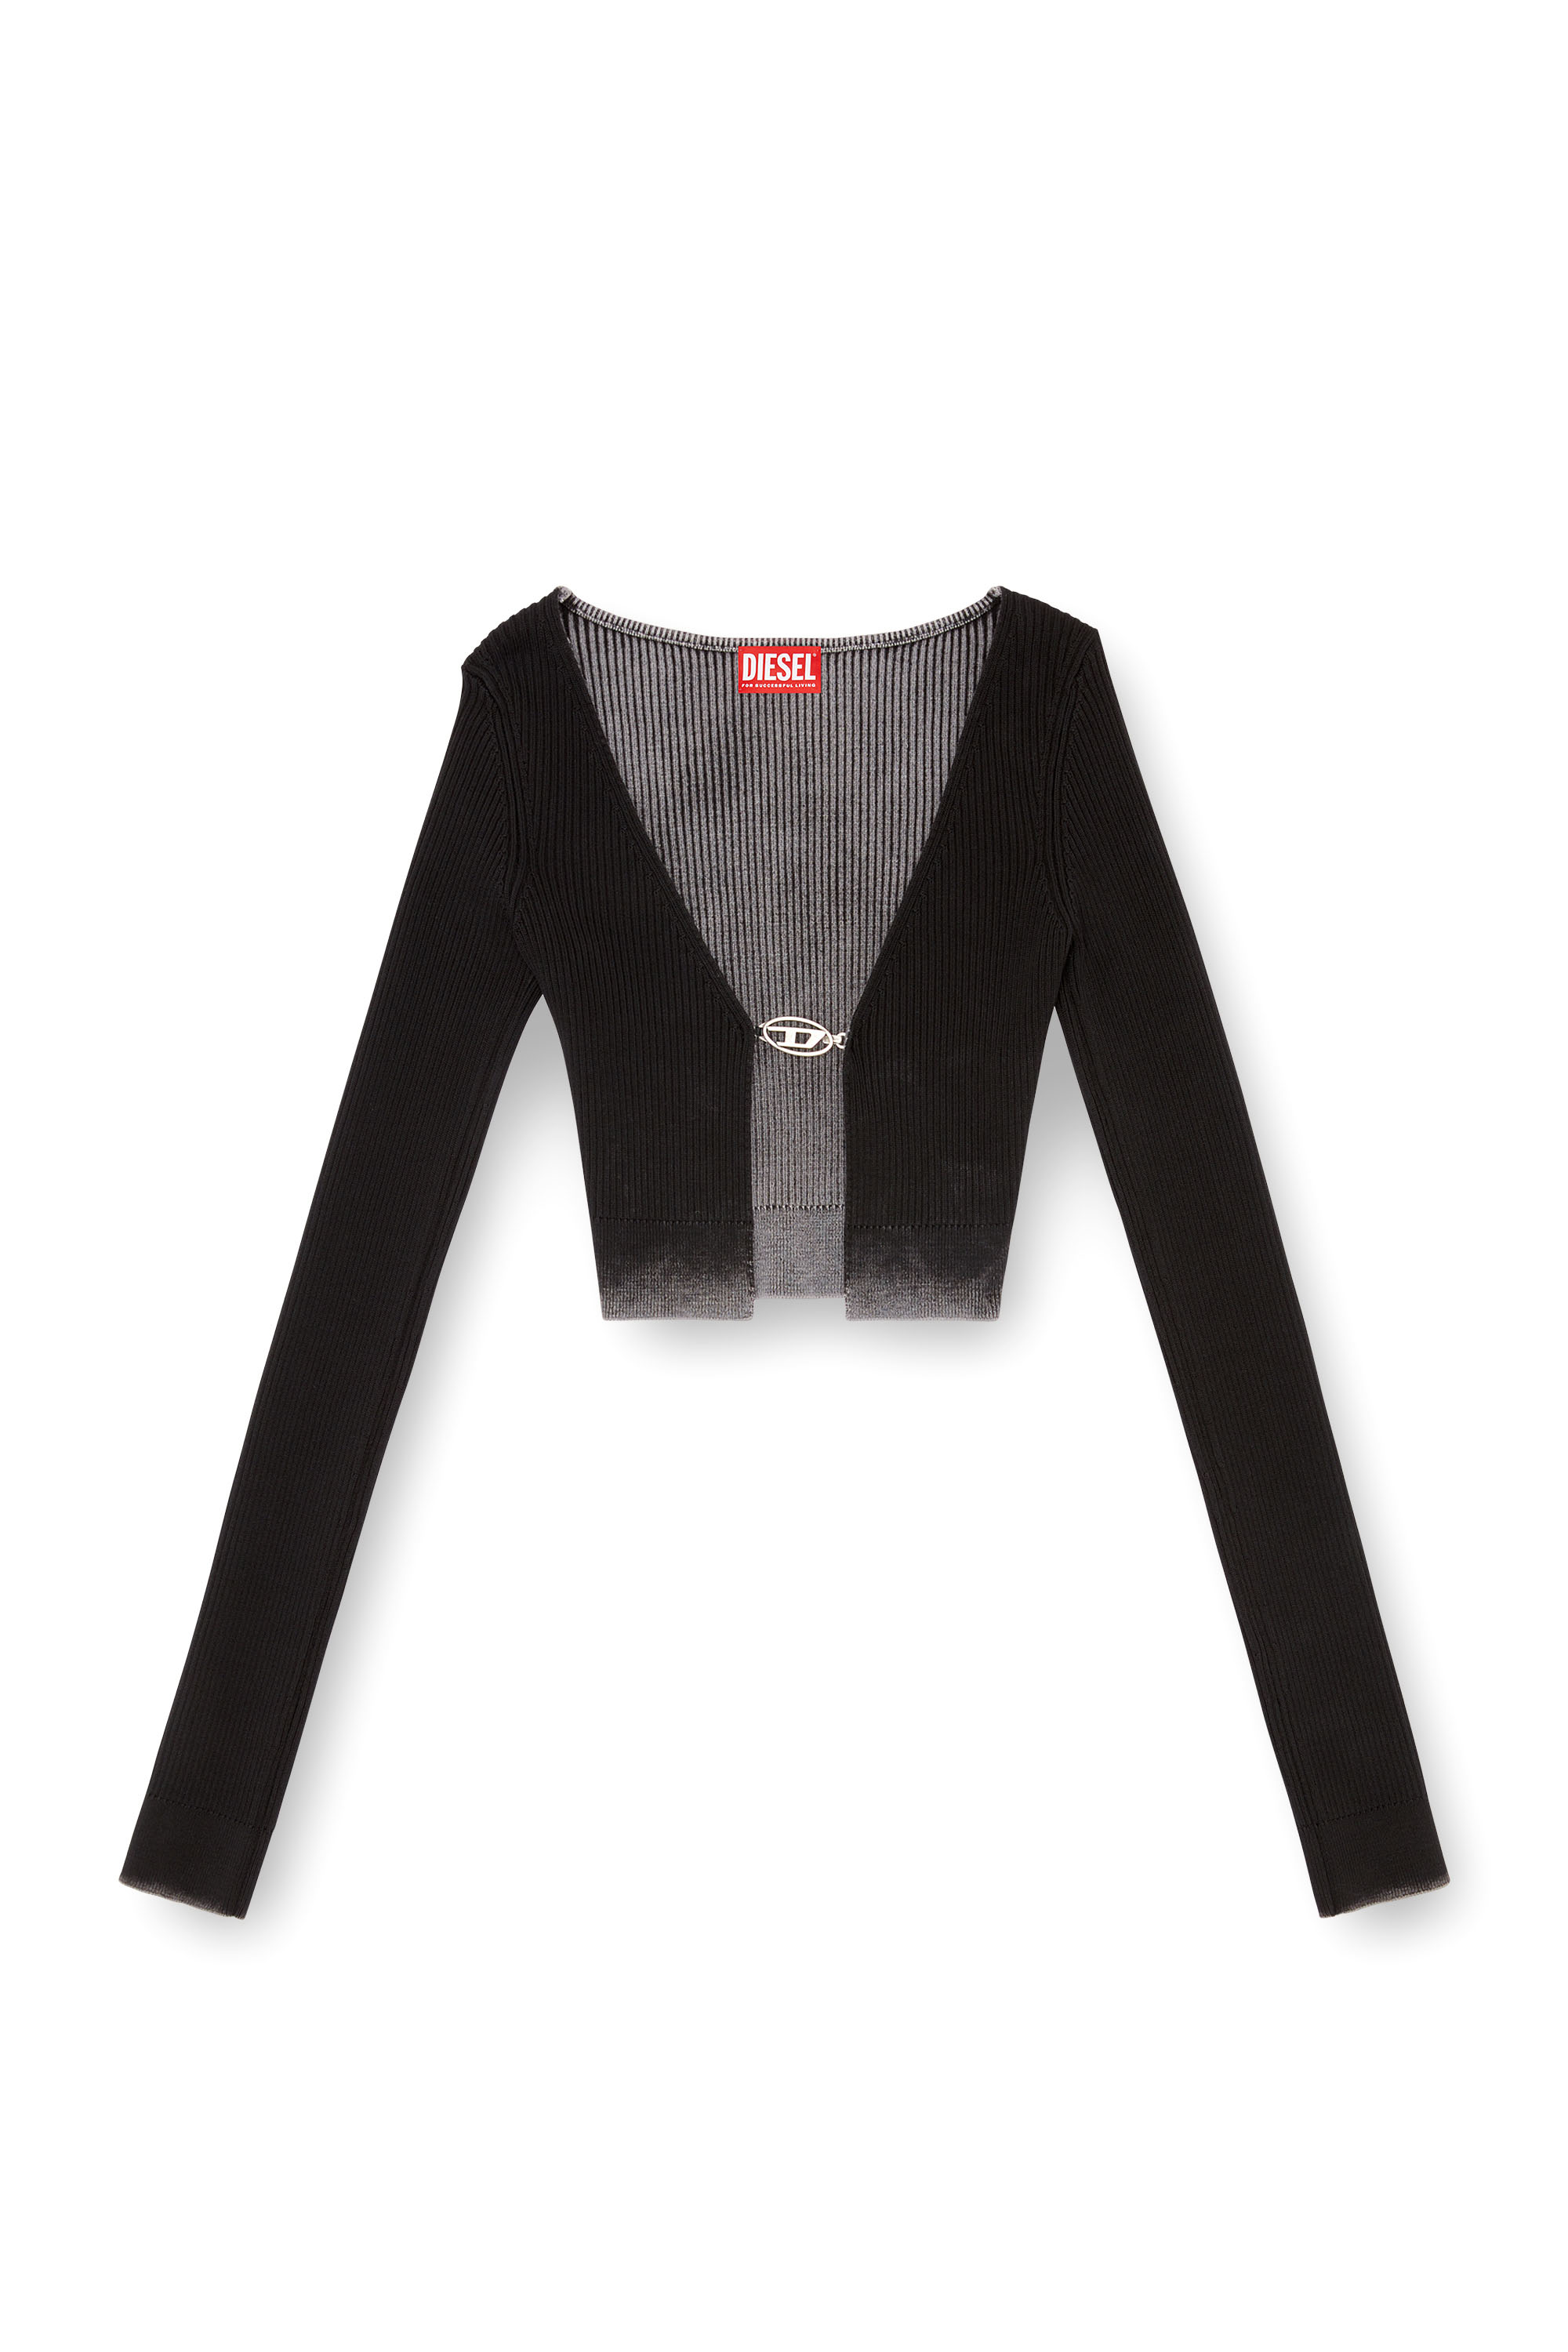 Diesel - M-LATINA, Female Cropped cardigan in faded ribbed knit in ブラック - Image 5